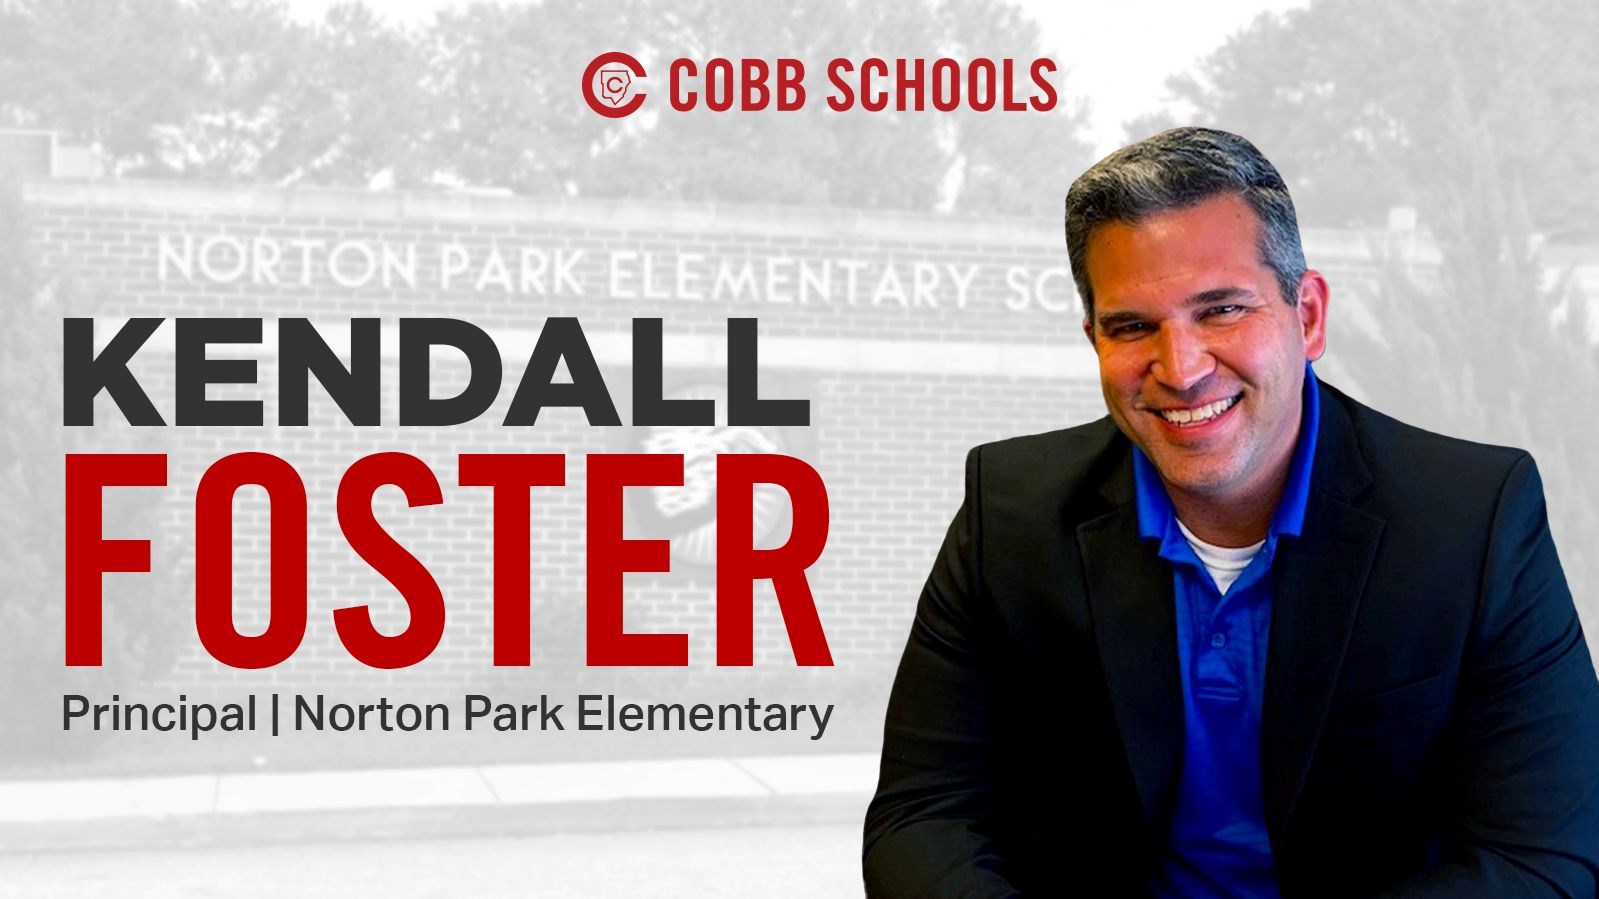 Kendall Foster to serve as principal at Norton Park Elementary School